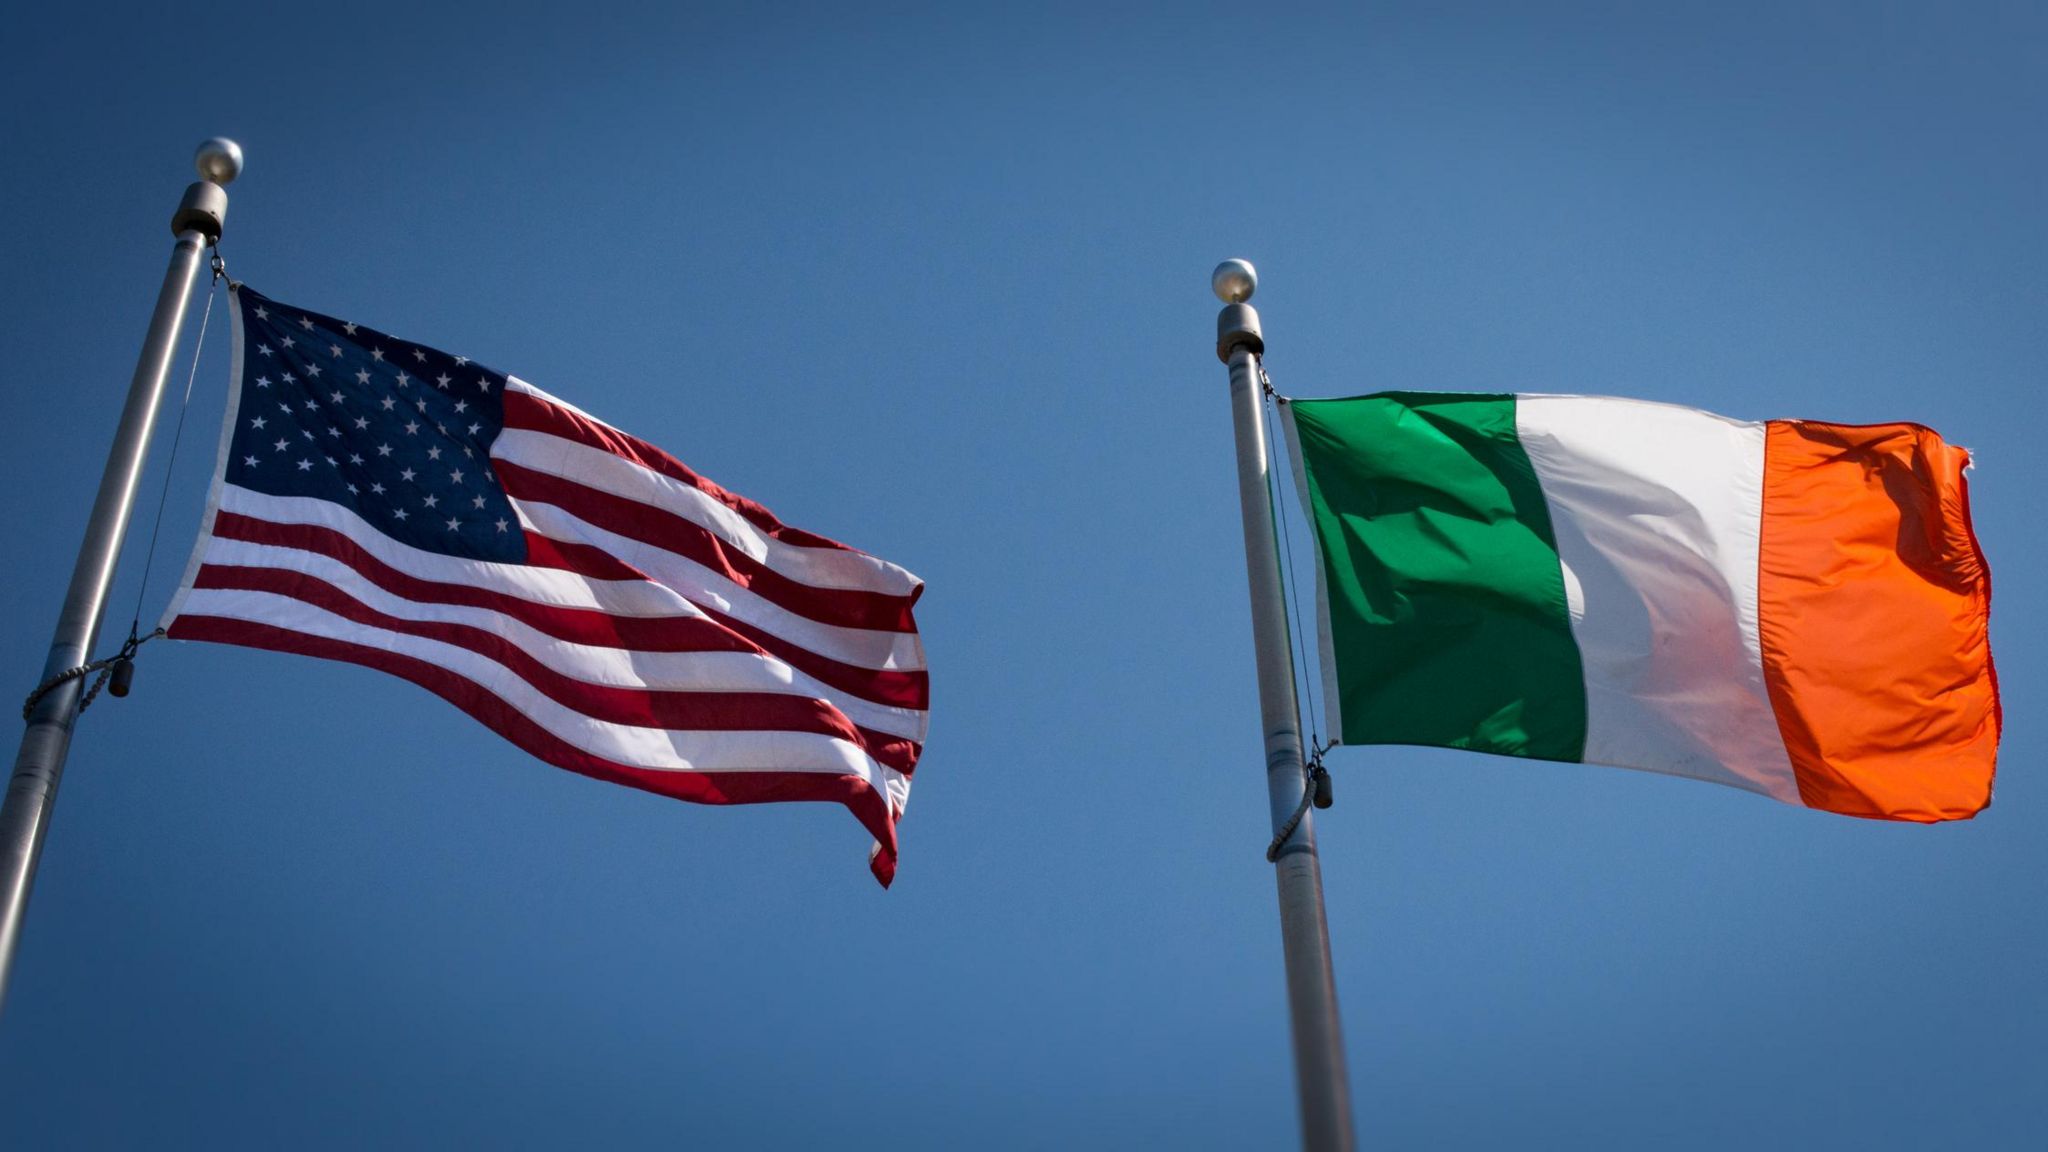 US and Ireland flags